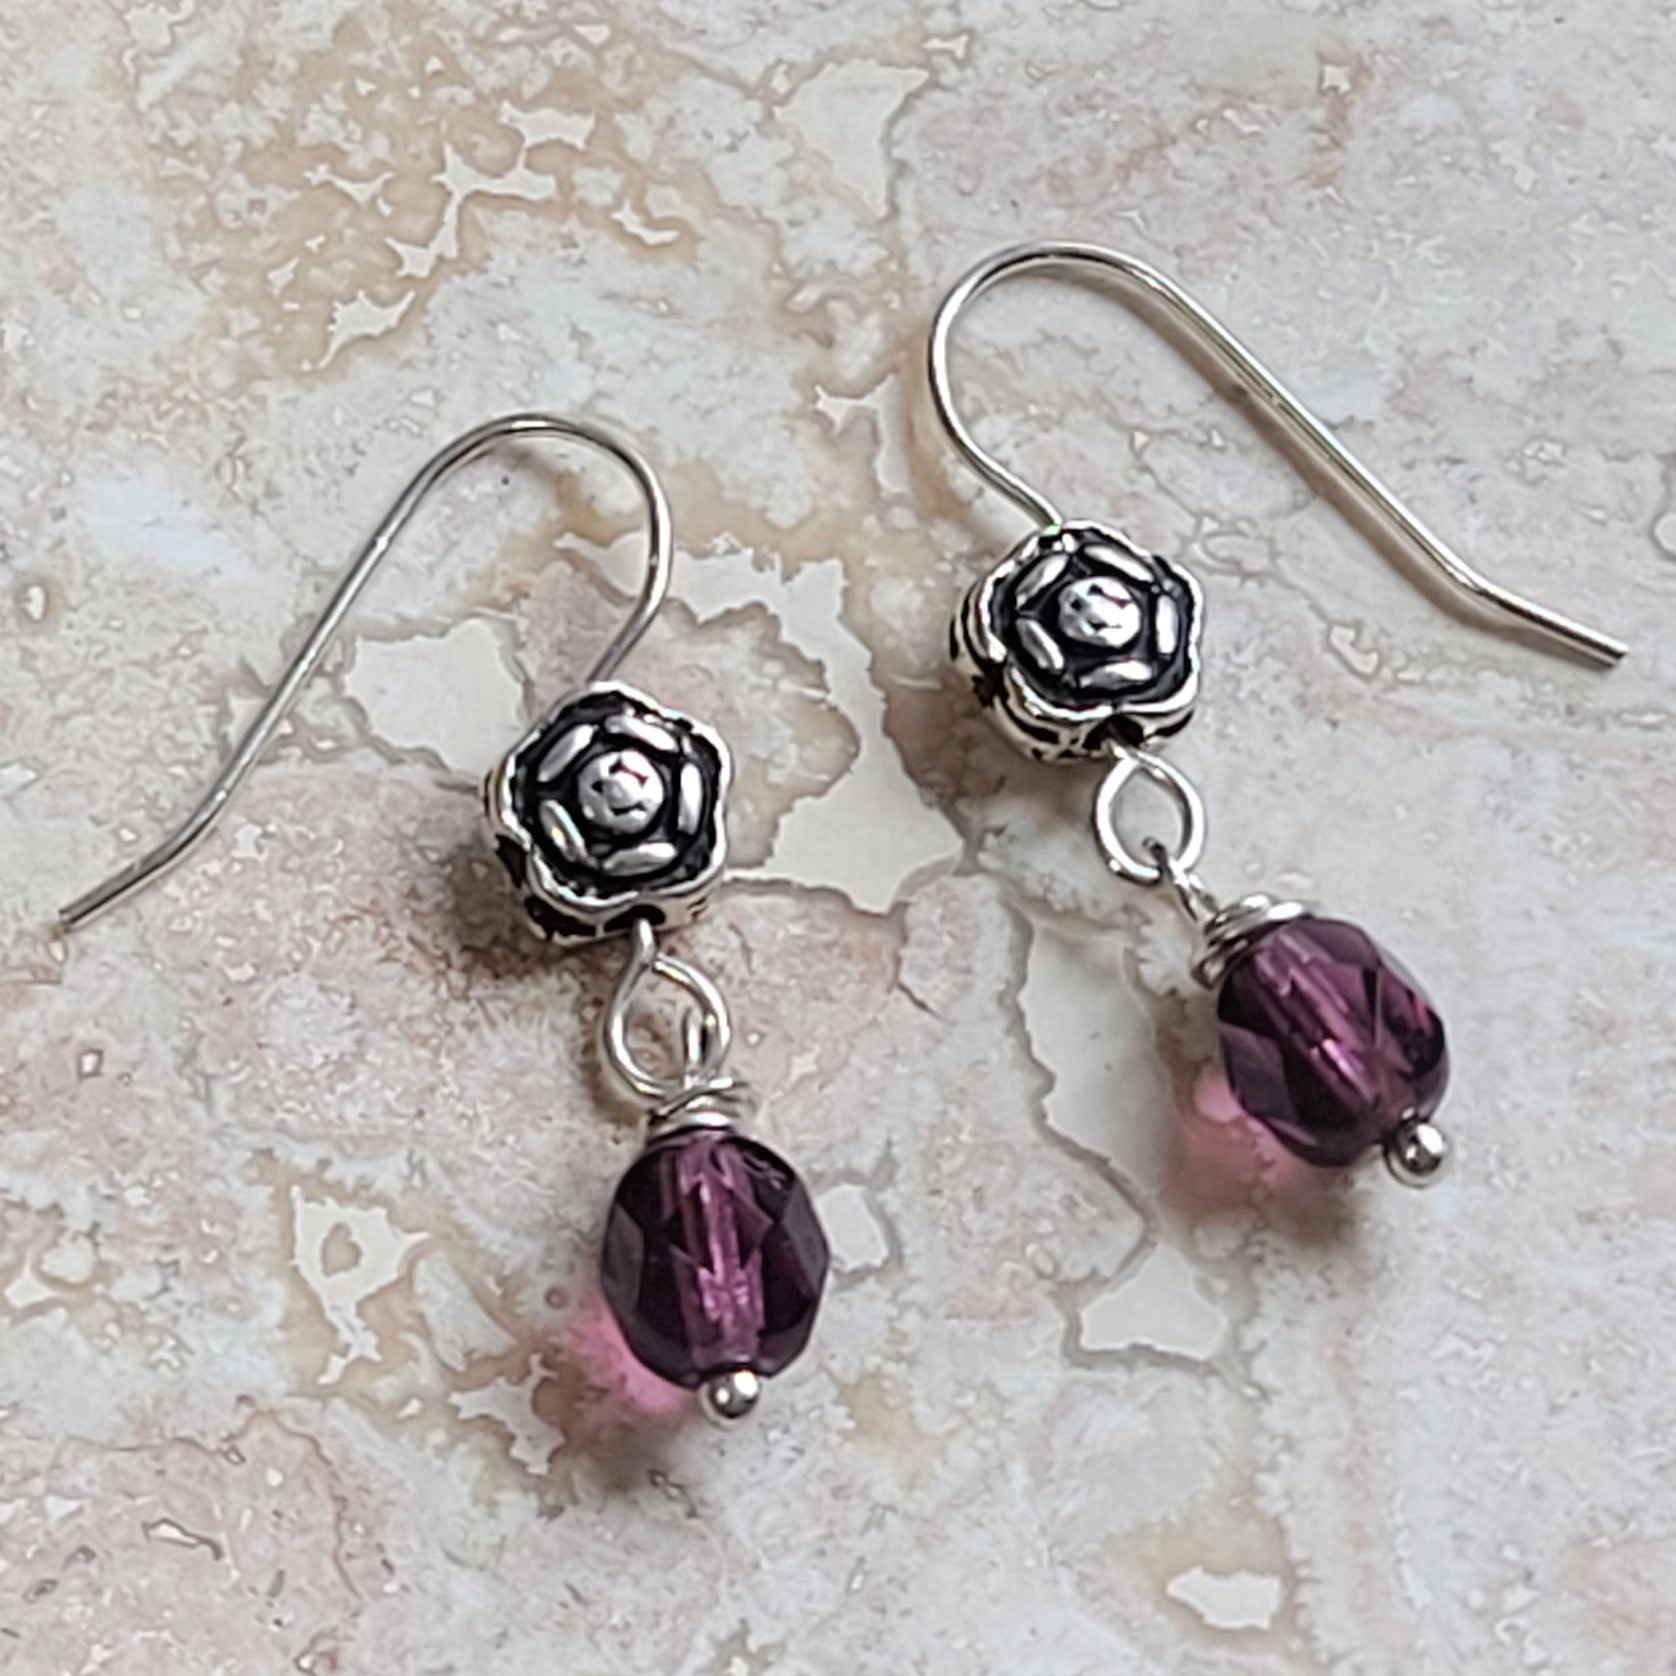 Bali Silver Flower with Amethyst Faceted Crystals Earrings